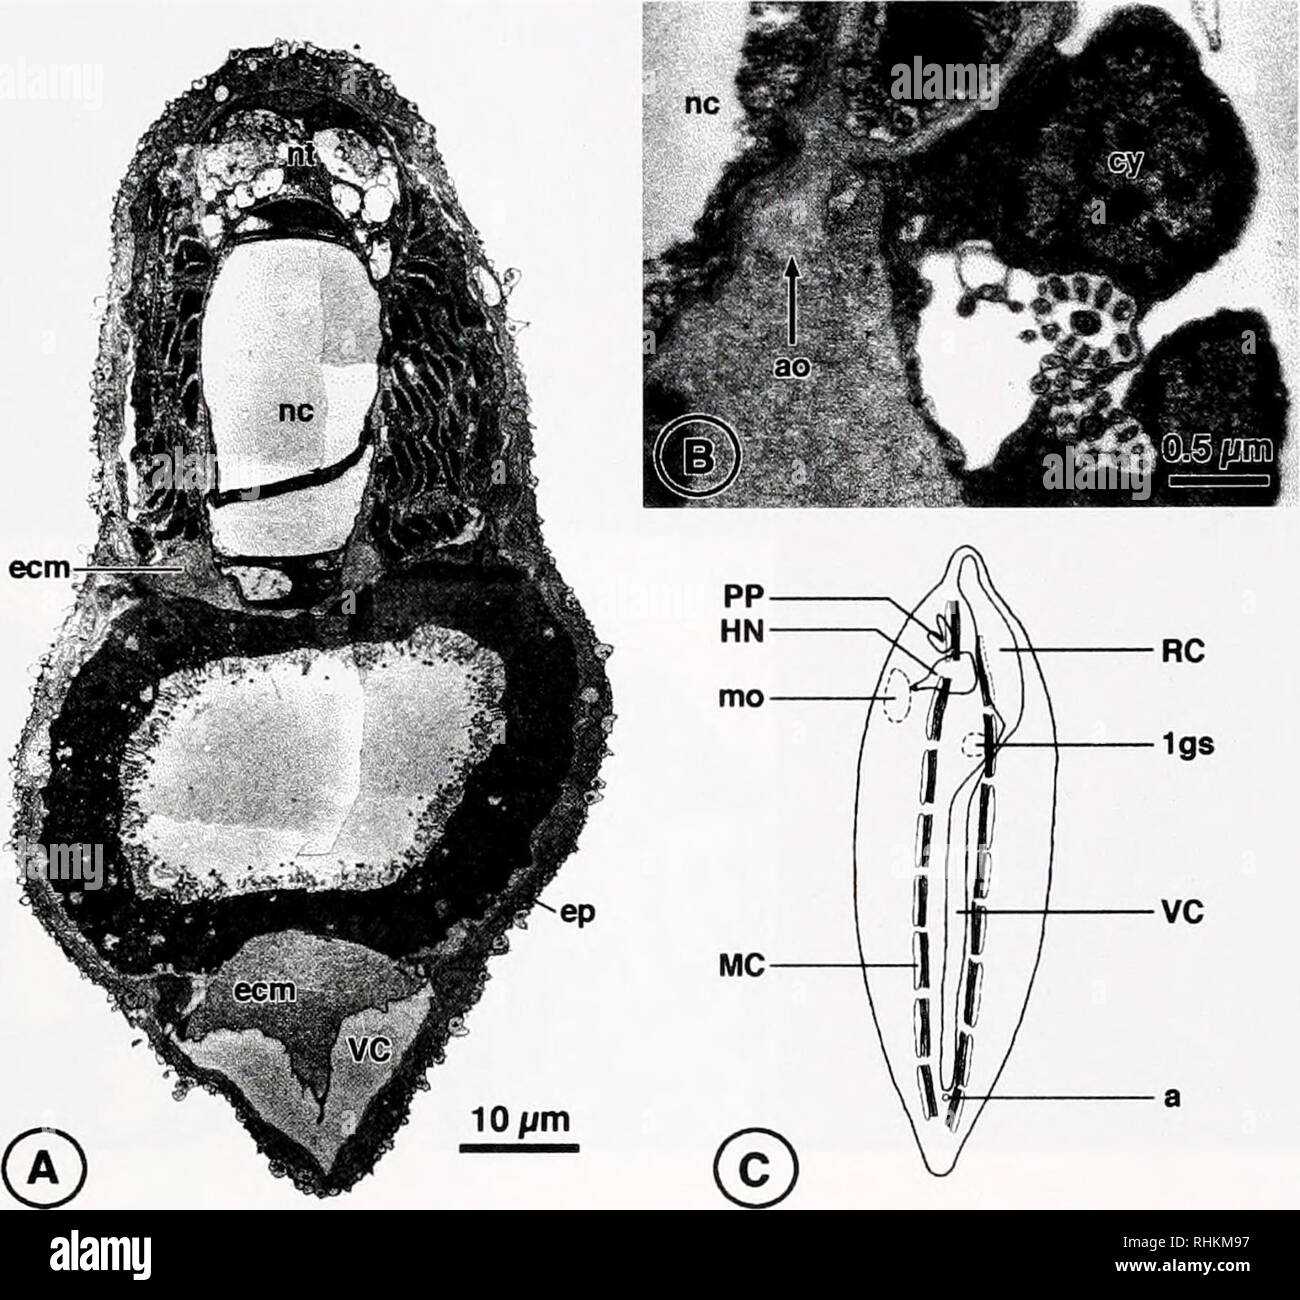 . The Biological bulletin. Biology; Zoology; Biology; Marine Biology. COELOMIC CAVITIES IN LARVAL AMPHIOXUS 261 ecm. Figure 1. (A &amp; B) Transmission electron micrographs of a larva of Branchiostoma lanceolatum [110 h post fertilization. 18°C; methods: (20)]. (A) Cross section of the trunk region. Structures labeled ecm are situated in areas where major blood vessels are situated in adults. (B) Hatschek's nephridium. Cyrtopodo- cytes on the enlarged ecm where the rudiment of the left anterior aorta is formed. (C) Diagrammatic dorsal view of coelomic cavities, a, anus; ao, anlage of the left  Stock Photo